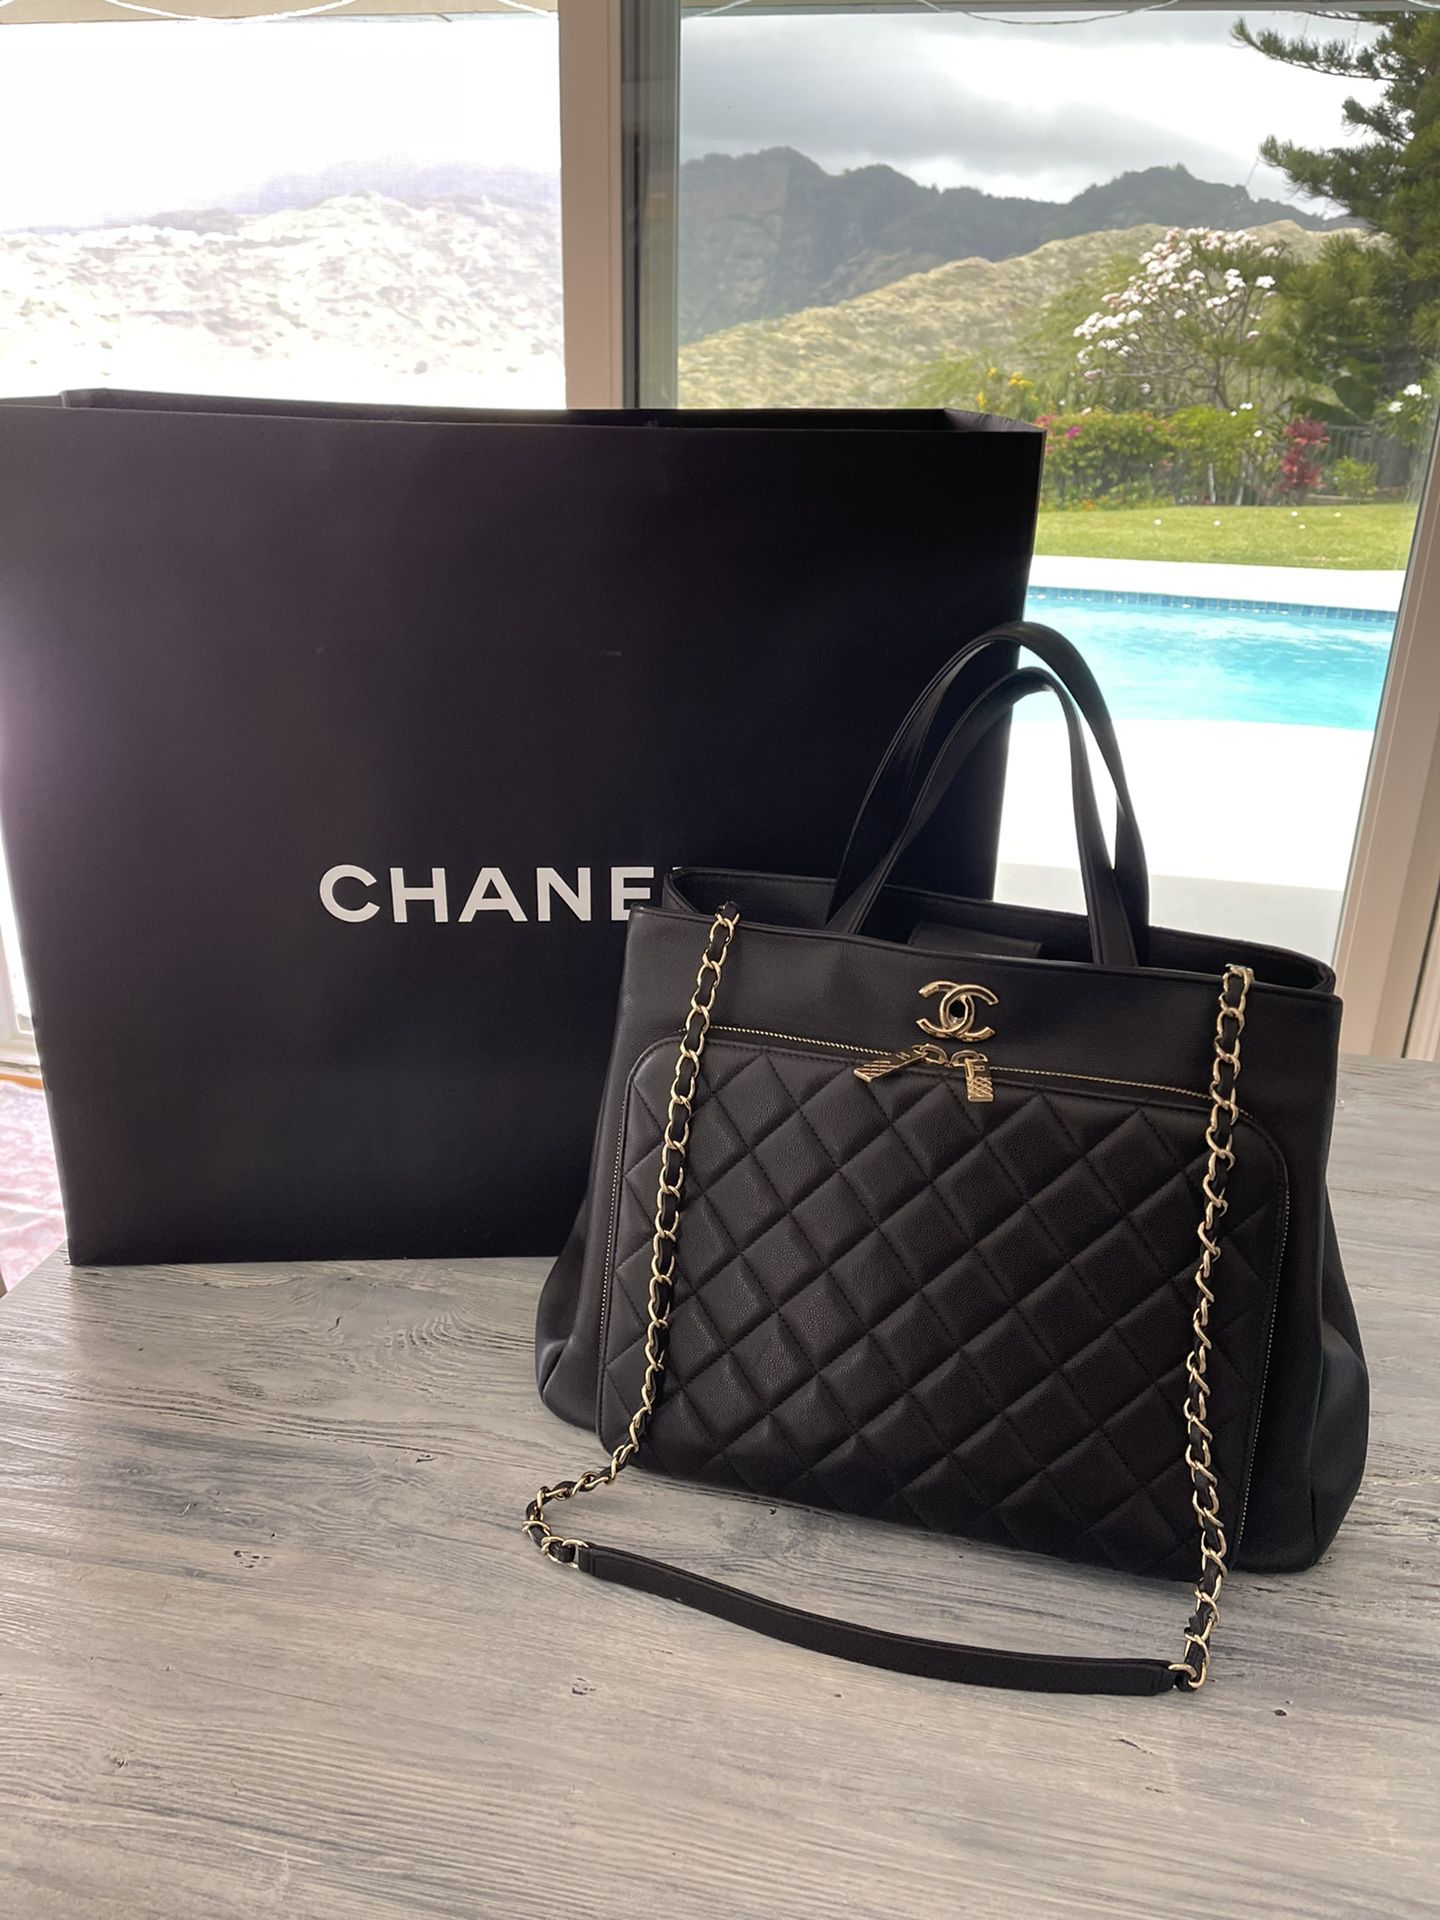 Chanel Business Affinity Tote - Neutrals Handle Bags, Handbags - CHA823783